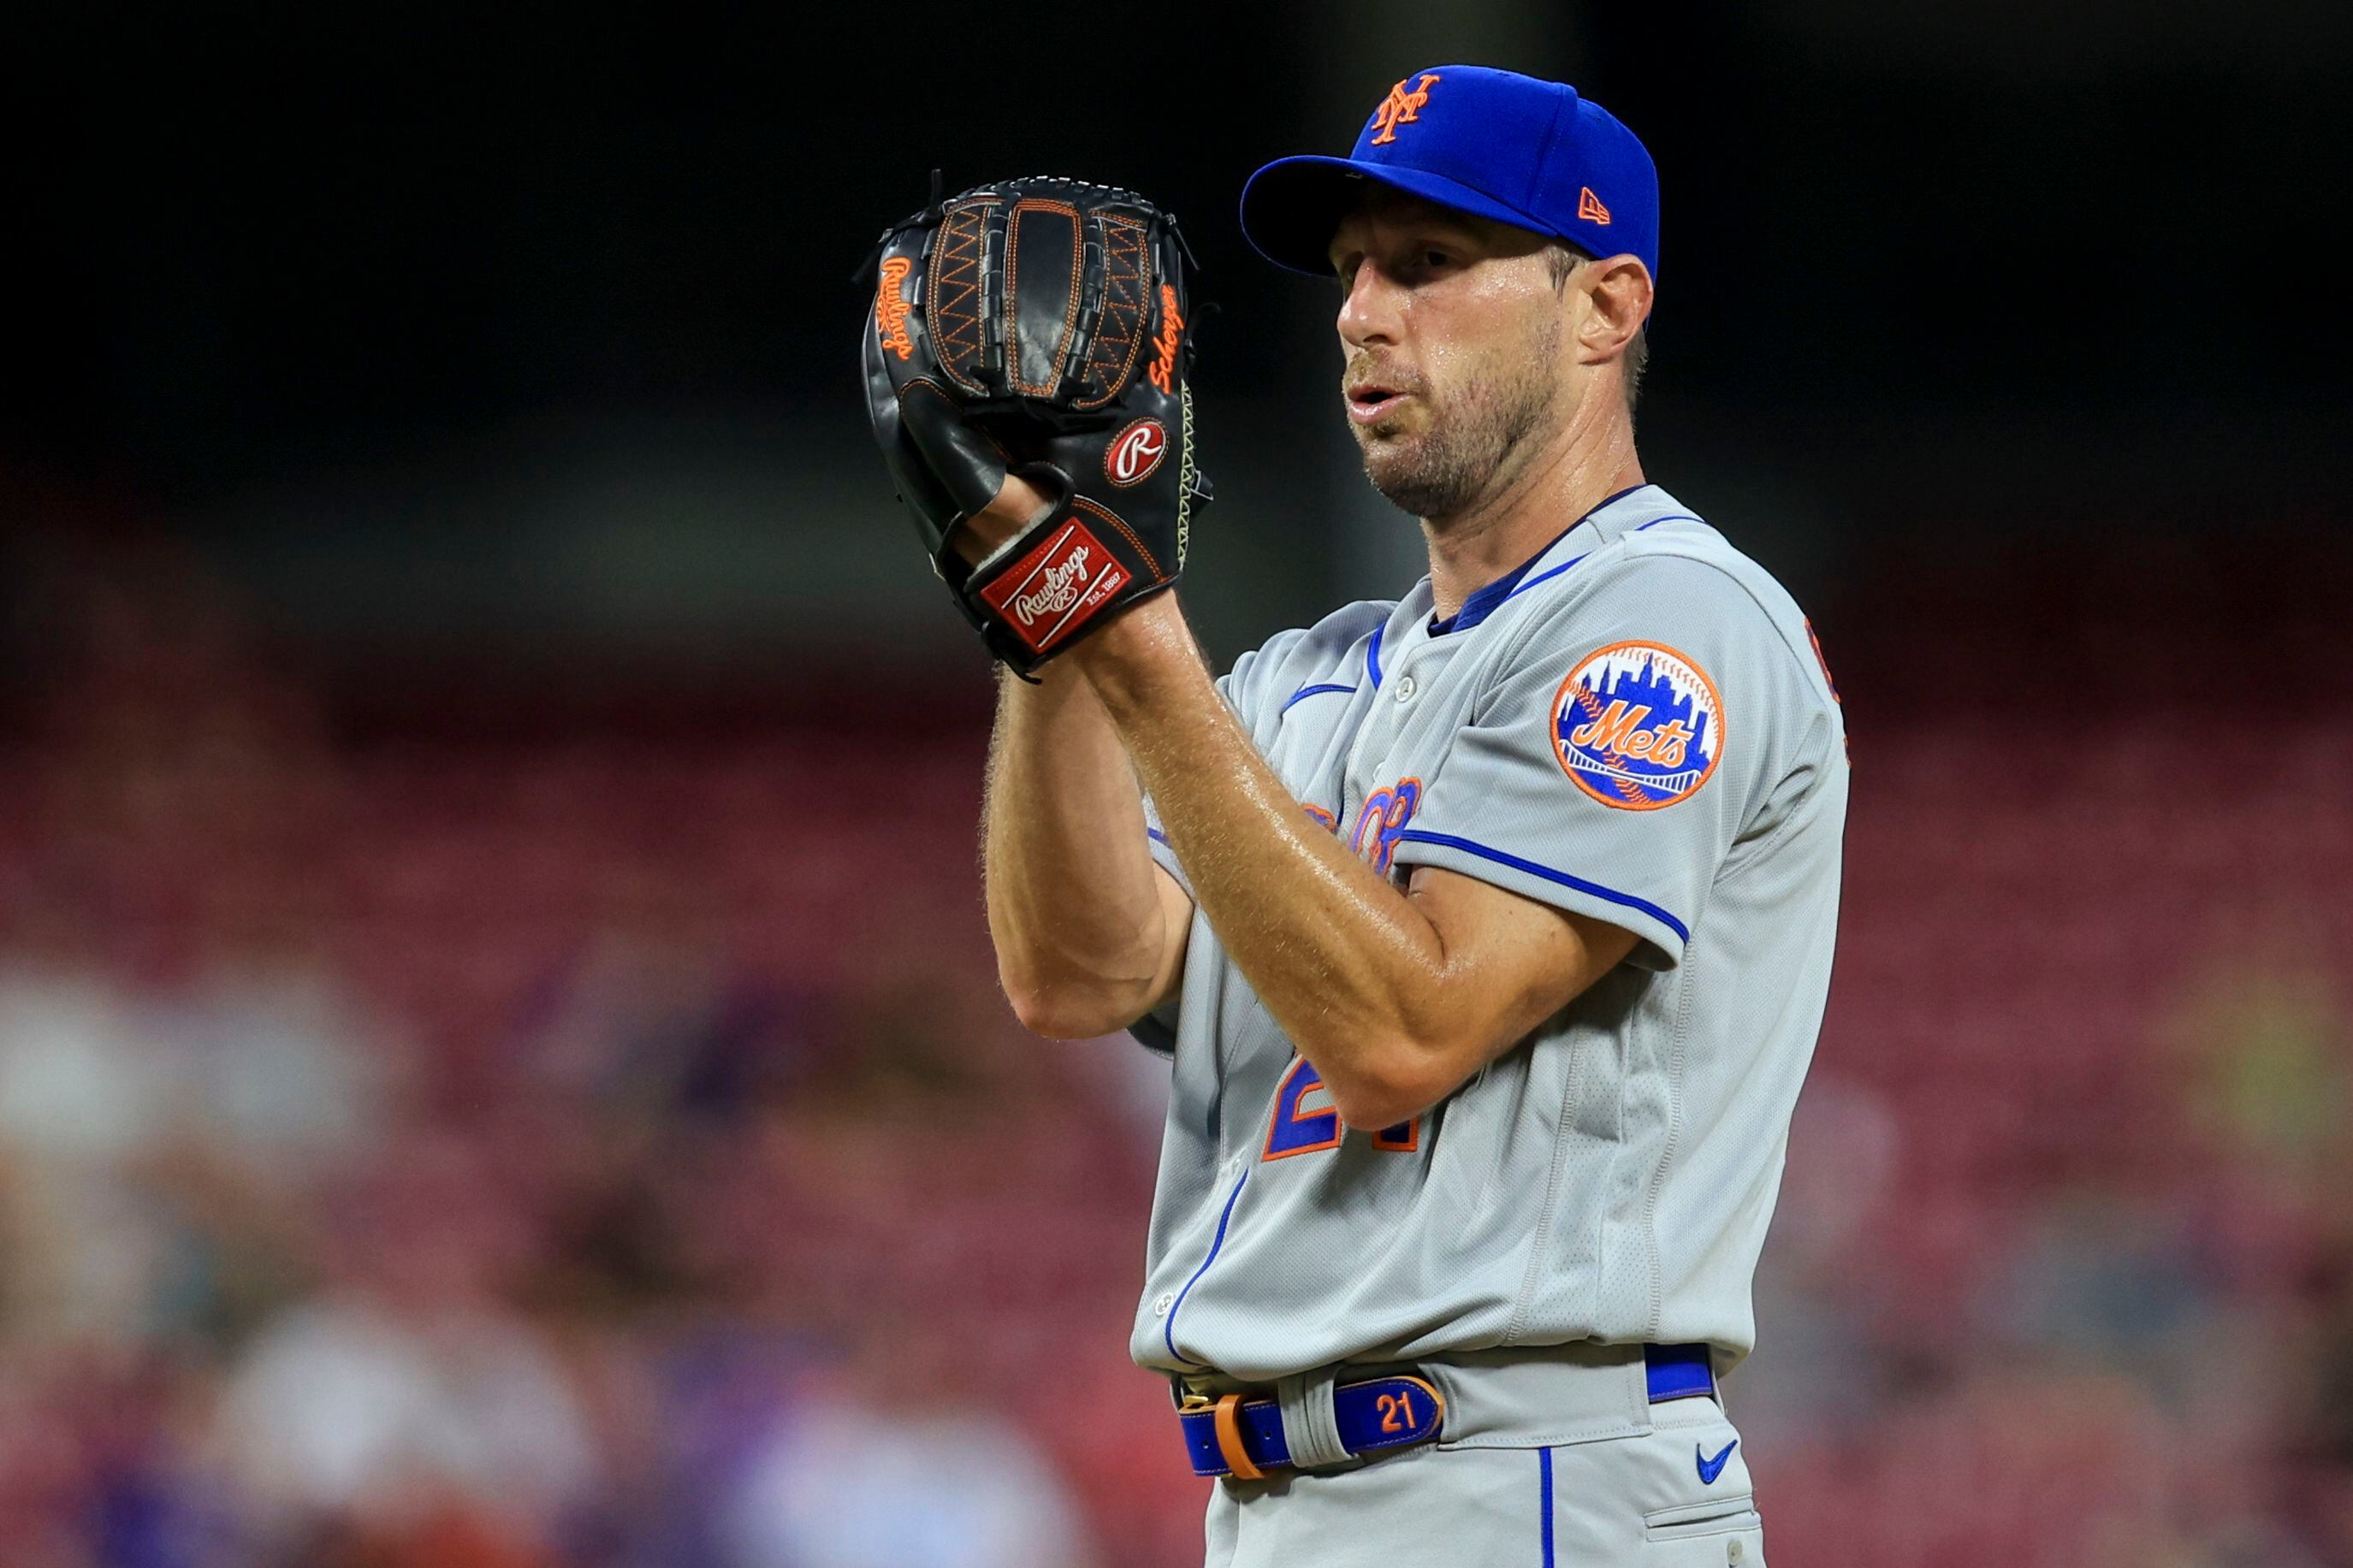 The Mets will pay Max Scherzer more in 2022 than some franchises